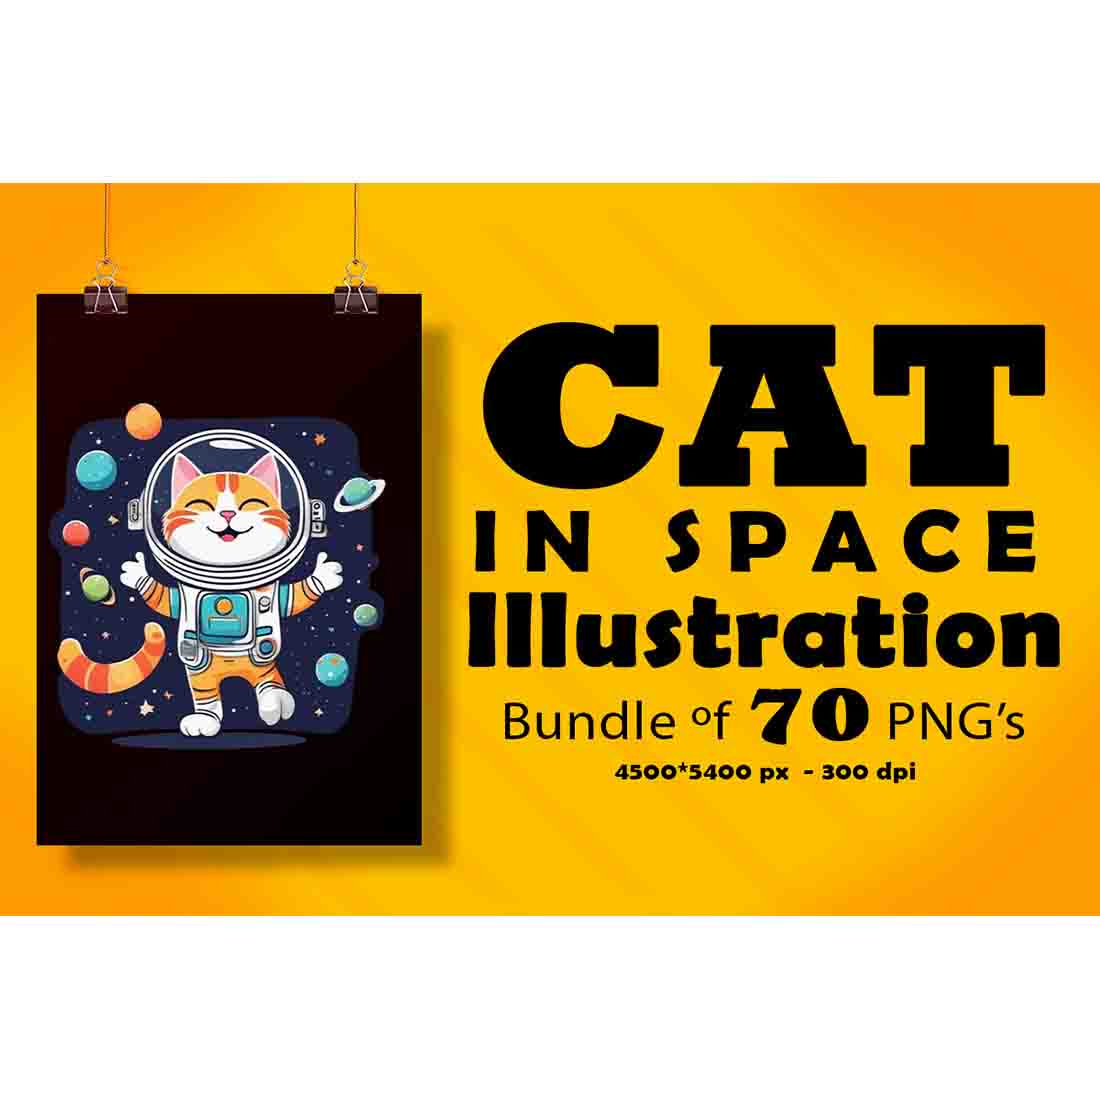 Cat in Space Illustration for POD 70 in 1 Bundle preview image.